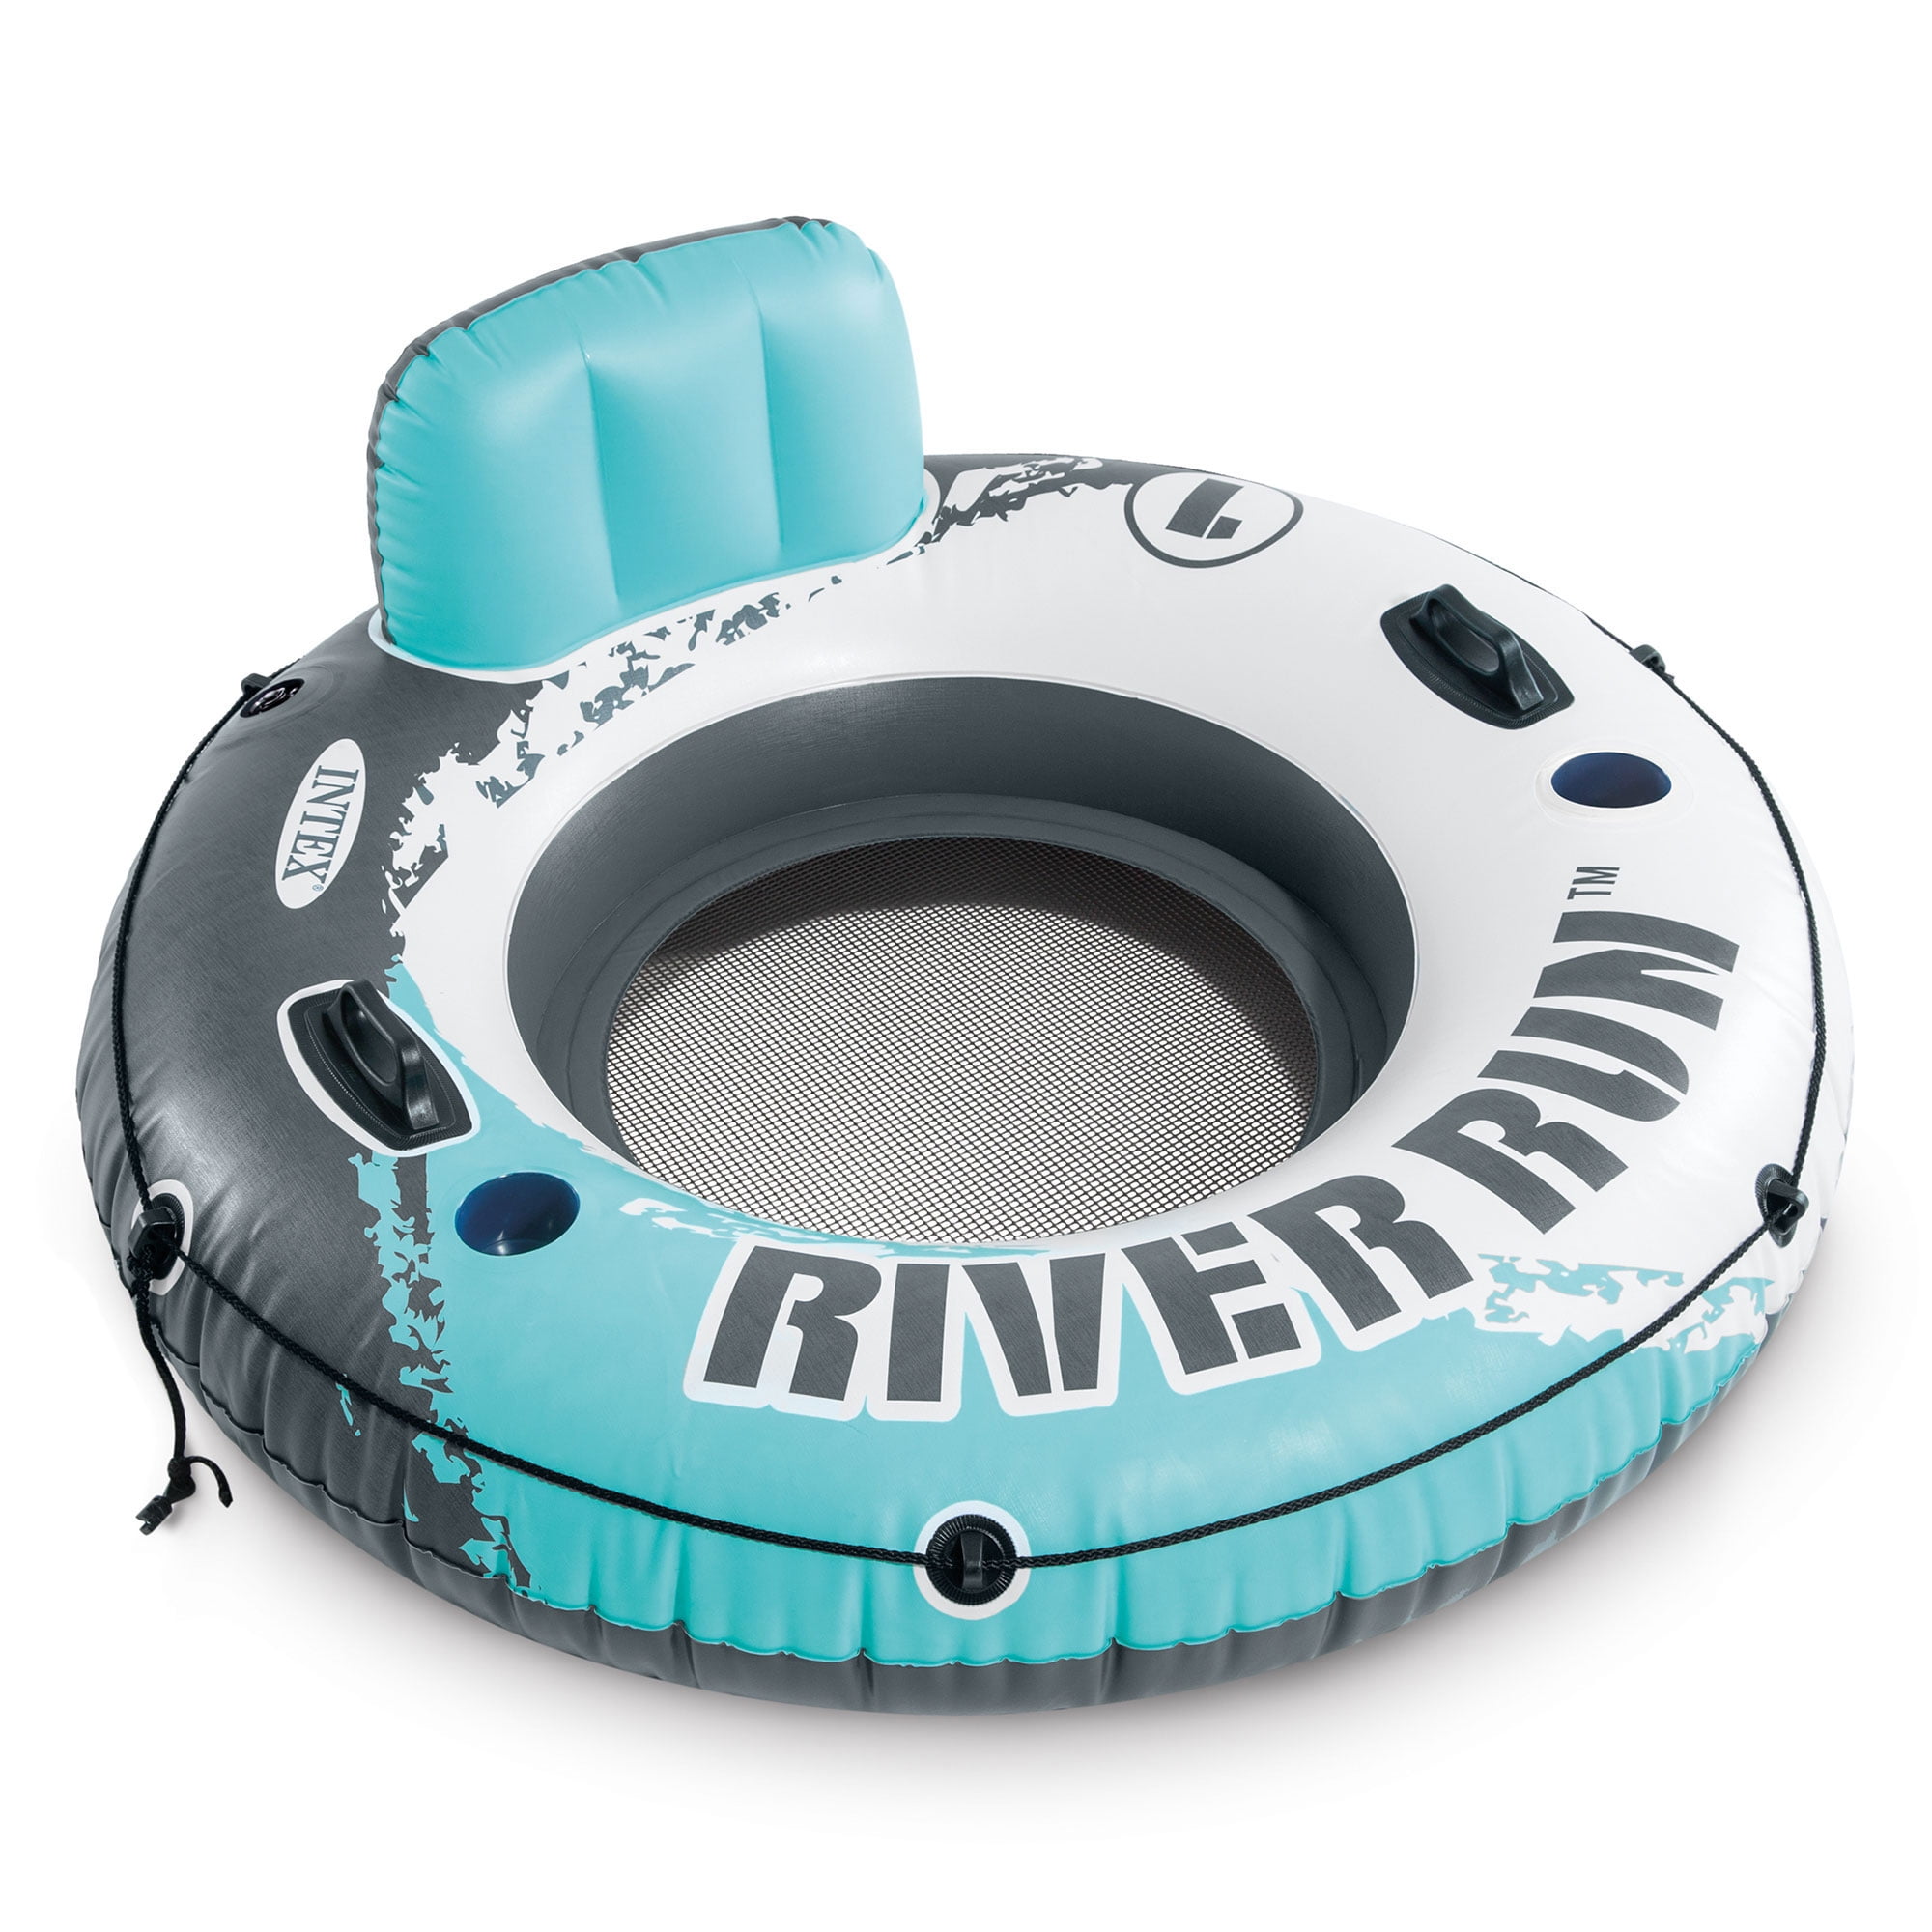 Intex River Run Inflatable Lake Floating Water Tube Lounger, Color